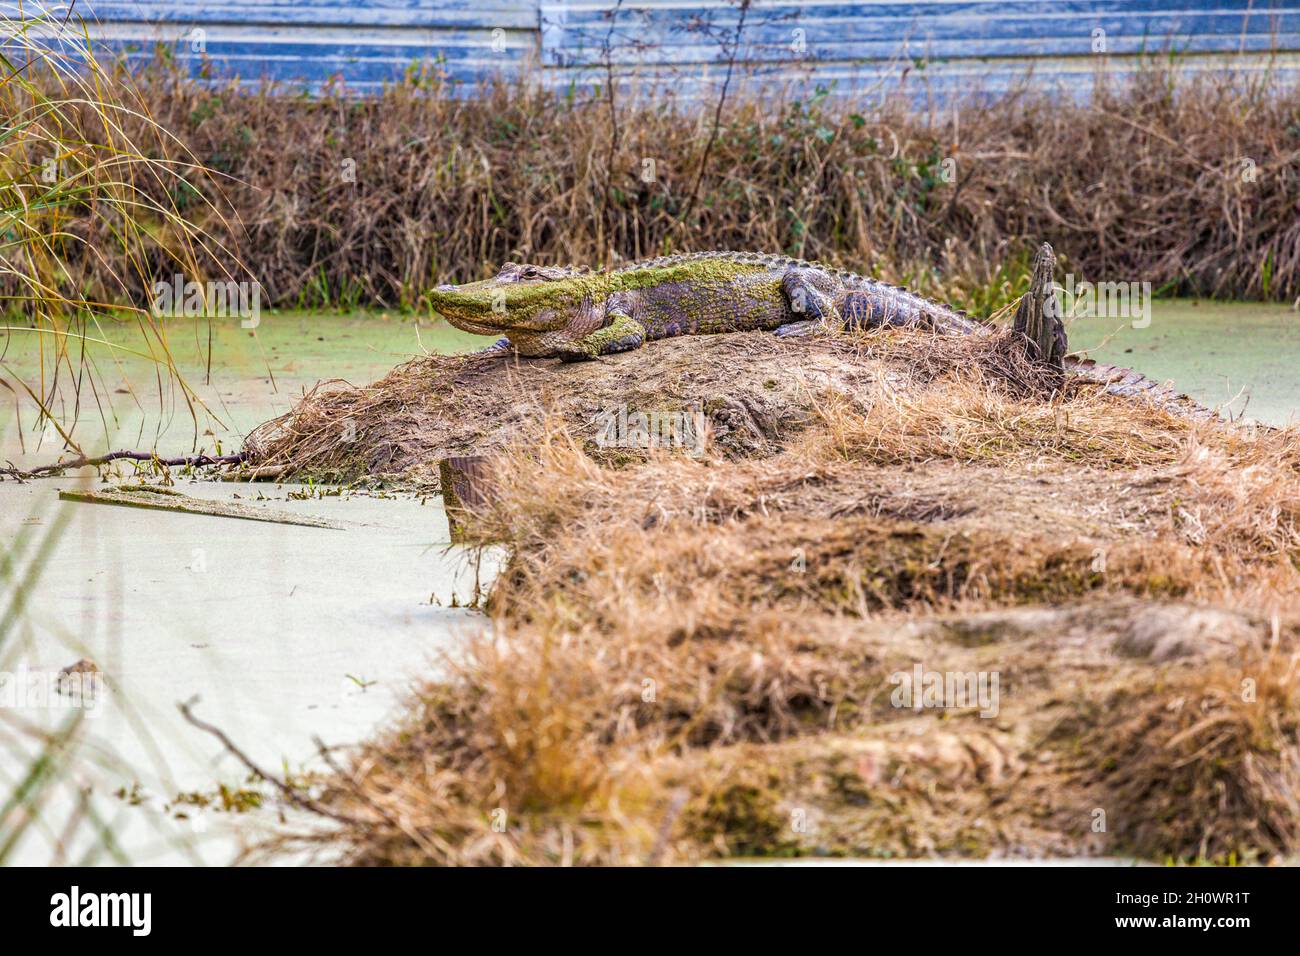 Adult alligator (Alligator mississippiensis) on a bog in the marsh near Pascagoula, Mississippi Stock Photo